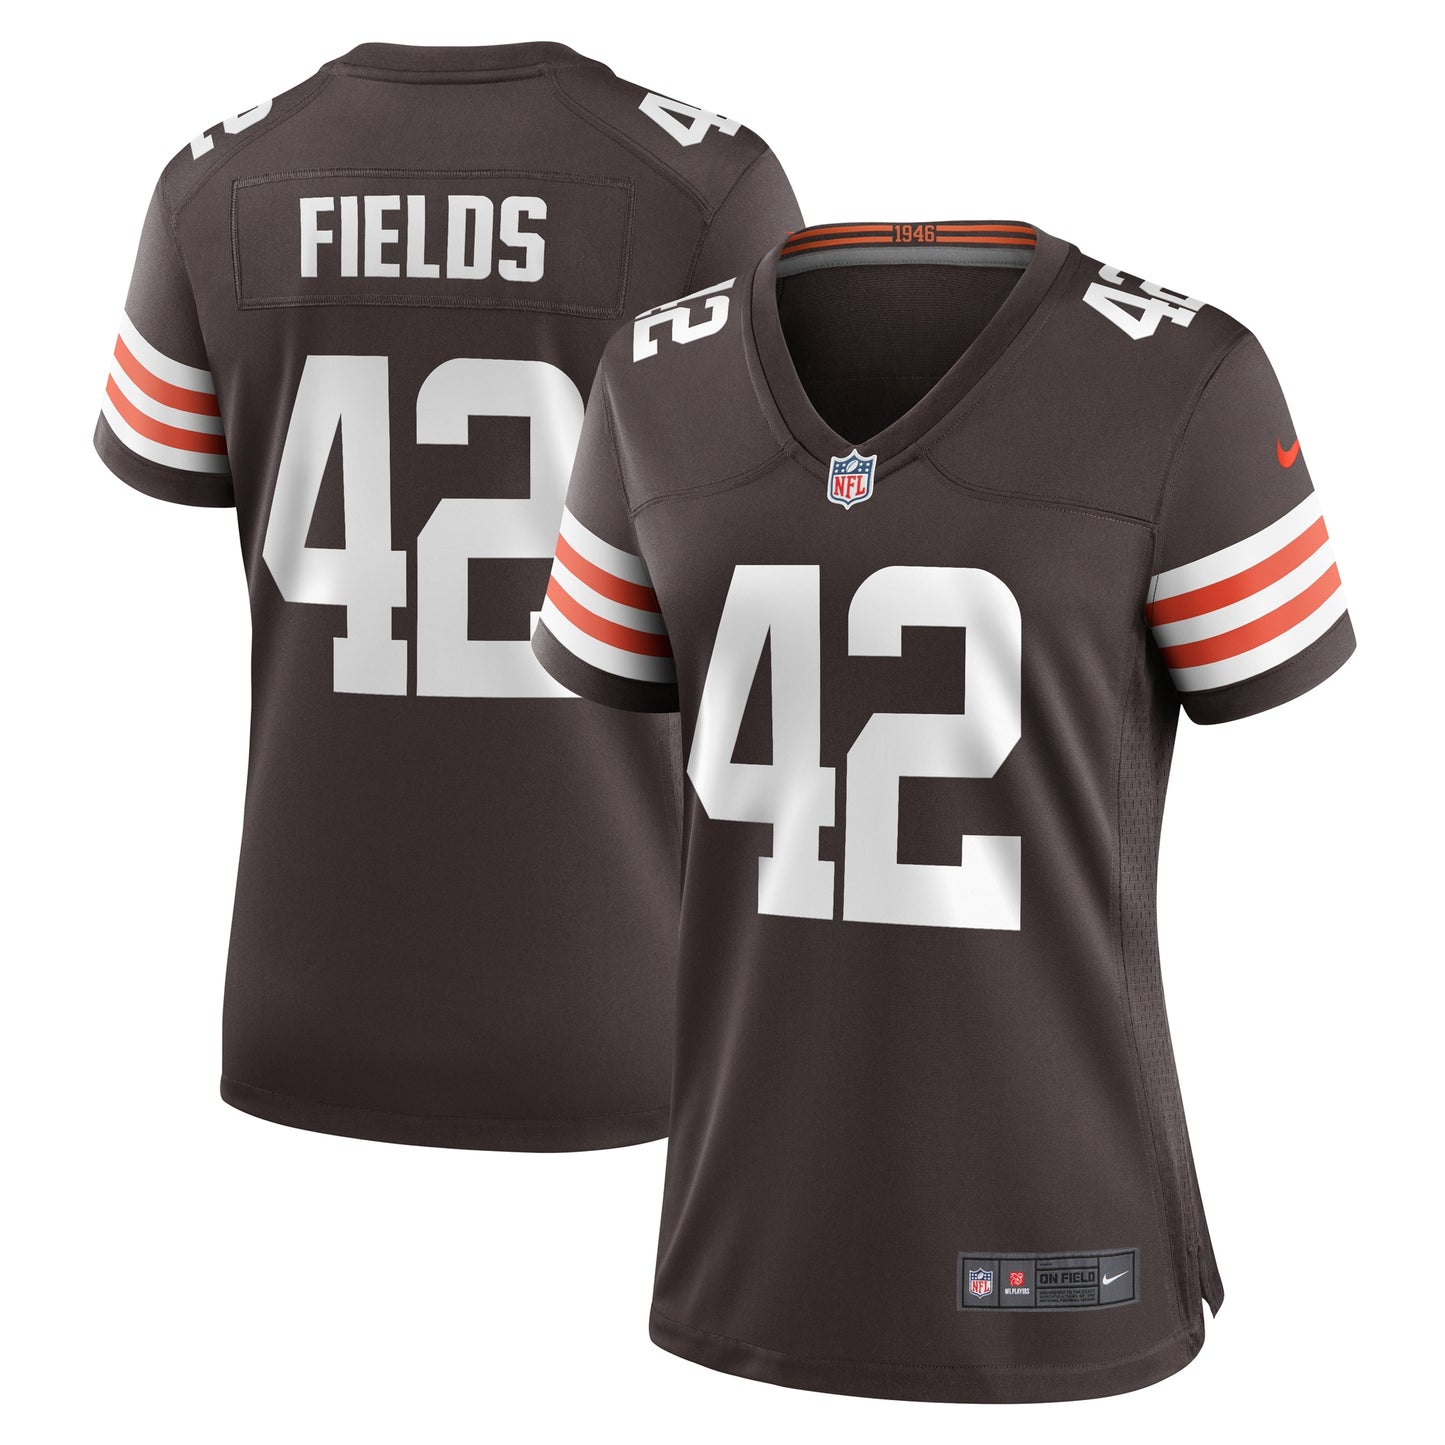 Tony Fields II Cleveland Browns Nike Women's Team Game Jersey -  Brown